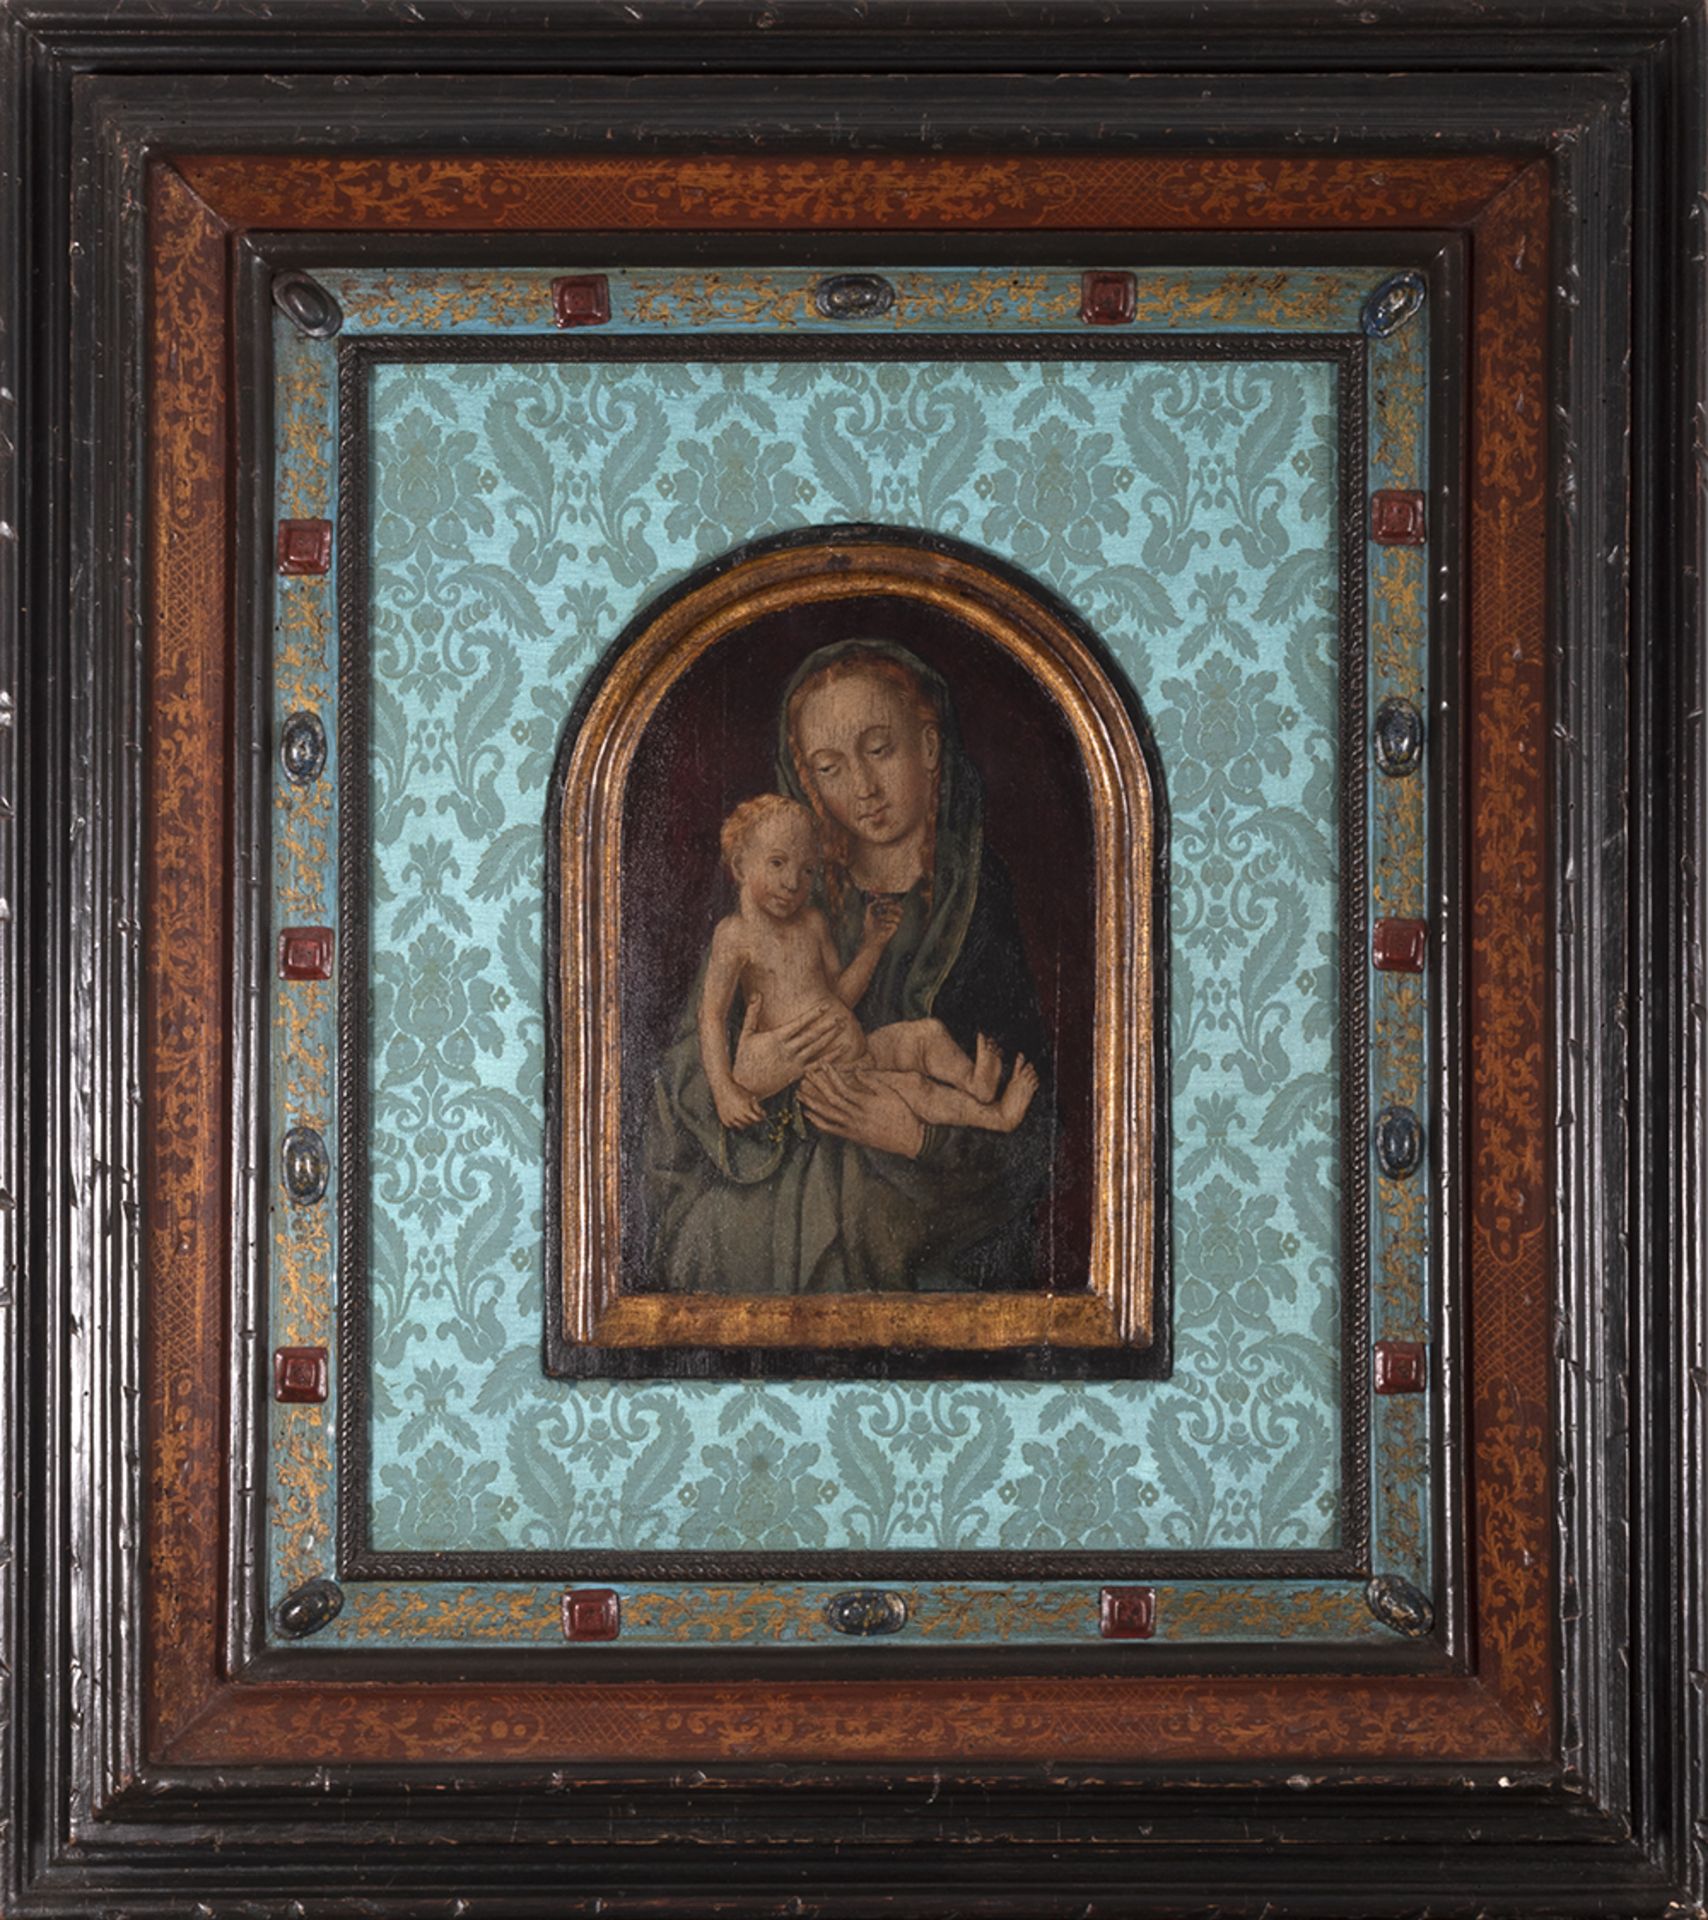 Flemish school from the 16th century. Virgin with Child.